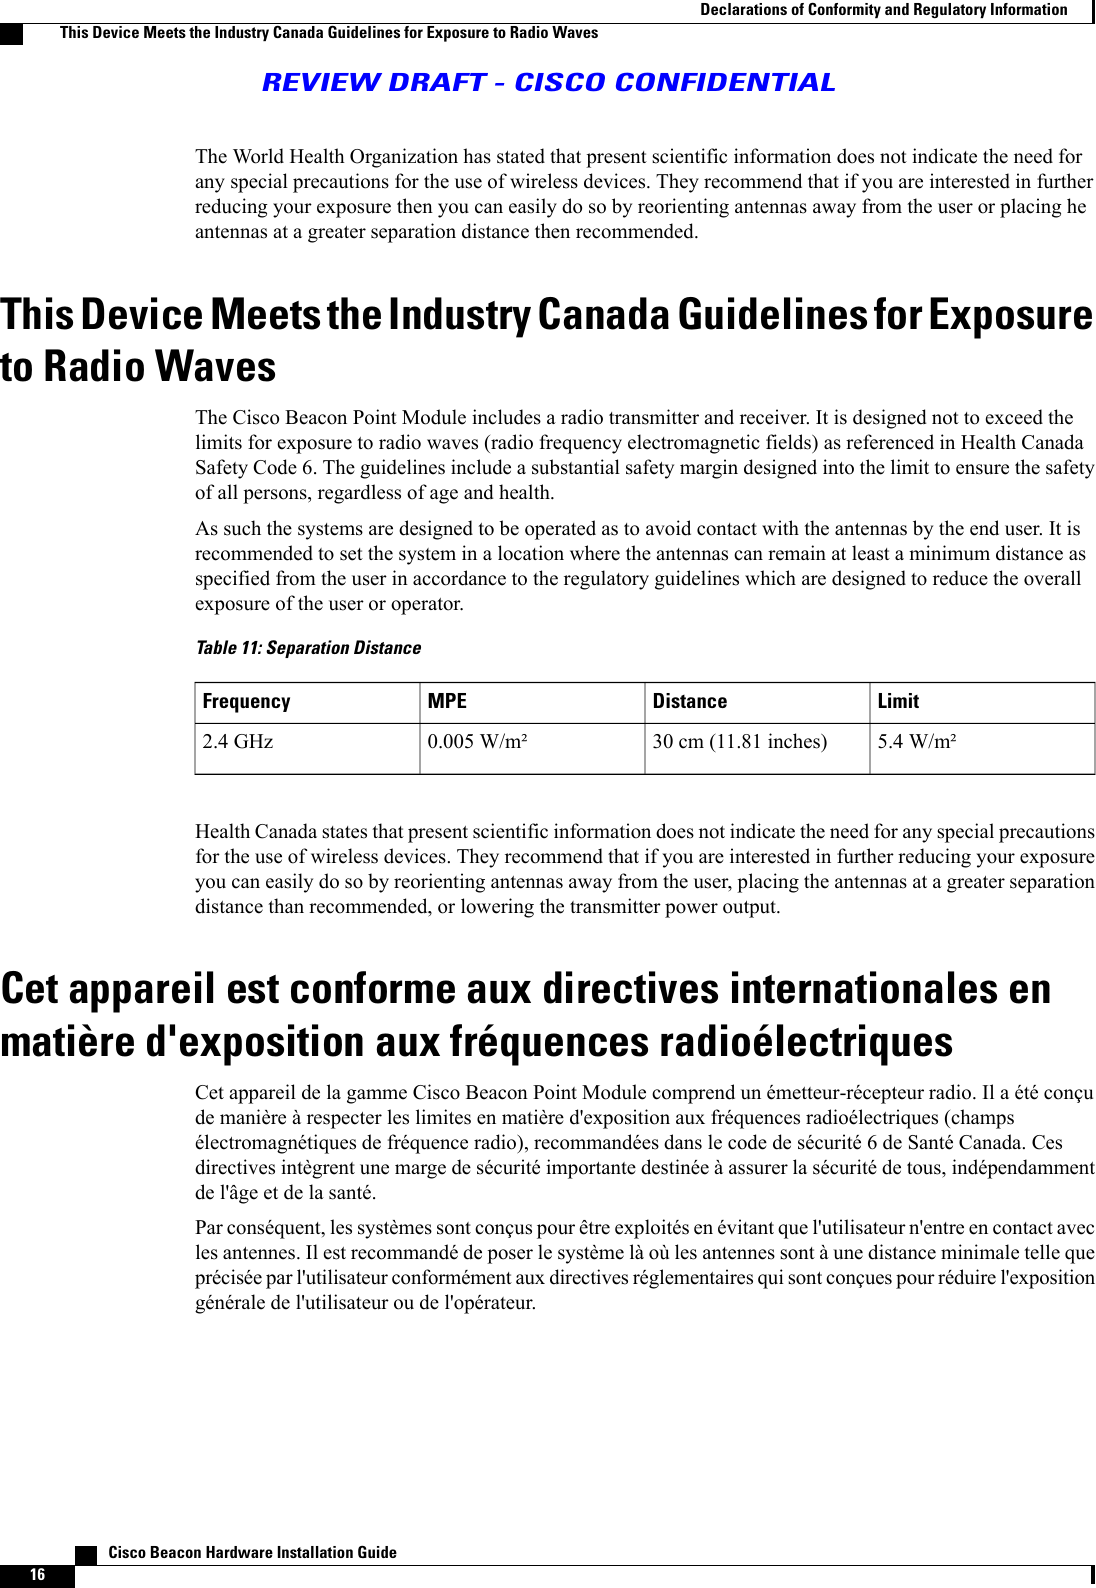 The World Health Organization has stated that present scientific information does not indicate the need forany special precautions for the use of wireless devices. They recommend that if you are interested in furtherreducing your exposure then you can easily do so by reorienting antennas away from the user or placing heantennas at a greater separation distance then recommended.This Device Meets the Industry Canada Guidelines for Exposureto Radio WavesThe Cisco Beacon Point Module includes a radio transmitter and receiver. It is designed not to exceed thelimits for exposure to radio waves (radio frequency electromagnetic fields) as referenced in Health CanadaSafety Code 6. The guidelines include a substantial safety margin designed into the limit to ensure the safetyof all persons, regardless of age and health.As such the systems are designed to be operated as to avoid contact with the antennas by the end user. It isrecommended to set the system in a location where the antennas can remain at least a minimum distance asspecified from the user in accordance to the regulatory guidelines which are designed to reduce the overallexposure of the user or operator.Table 11: Separation DistanceLimitDistanceMPEFrequency5.4 W/m²30 cm (11.81 inches)0.005 W/m²2.4 GHzHealth Canada states that present scientific information does not indicate the need for any special precautionsfor the use of wireless devices. They recommend that if you are interested in further reducing your exposureyou can easily do so by reorienting antennas away from the user, placing the antennas at a greater separationdistance than recommended, or lowering the transmitter power output.Cet appareil est conforme aux directives internationales enmatière d&apos;exposition aux fréquences radioélectriquesCet appareil de la gamme Cisco Beacon Point Module comprend un émetteur-récepteur radio. Il a été conçude manière à respecter les limites en matière d&apos;exposition aux fréquences radioélectriques (champsélectromagnétiques de fréquence radio), recommandées dans le code de sécurité 6 de Santé Canada. Cesdirectives intègrent une marge de sécurité importante destinée à assurer la sécurité de tous, indépendammentde l&apos;âge et de la santé.Par conséquent, les systèmes sont conçus pour être exploités en évitant que l&apos;utilisateur n&apos;entre en contact avecles antennes. Il est recommandé de poser le système là où les antennes sont à une distance minimale telle queprécisée par l&apos;utilisateur conformément aux directives réglementaires qui sont conçues pour réduire l&apos;expositiongénérale de l&apos;utilisateur ou de l&apos;opérateur.   Cisco Beacon Hardware Installation Guide16Declarations of Conformity and Regulatory InformationThis Device Meets the Industry Canada Guidelines for Exposure to Radio WavesREVIEW DRAFT - CISCO CONFIDENTIAL